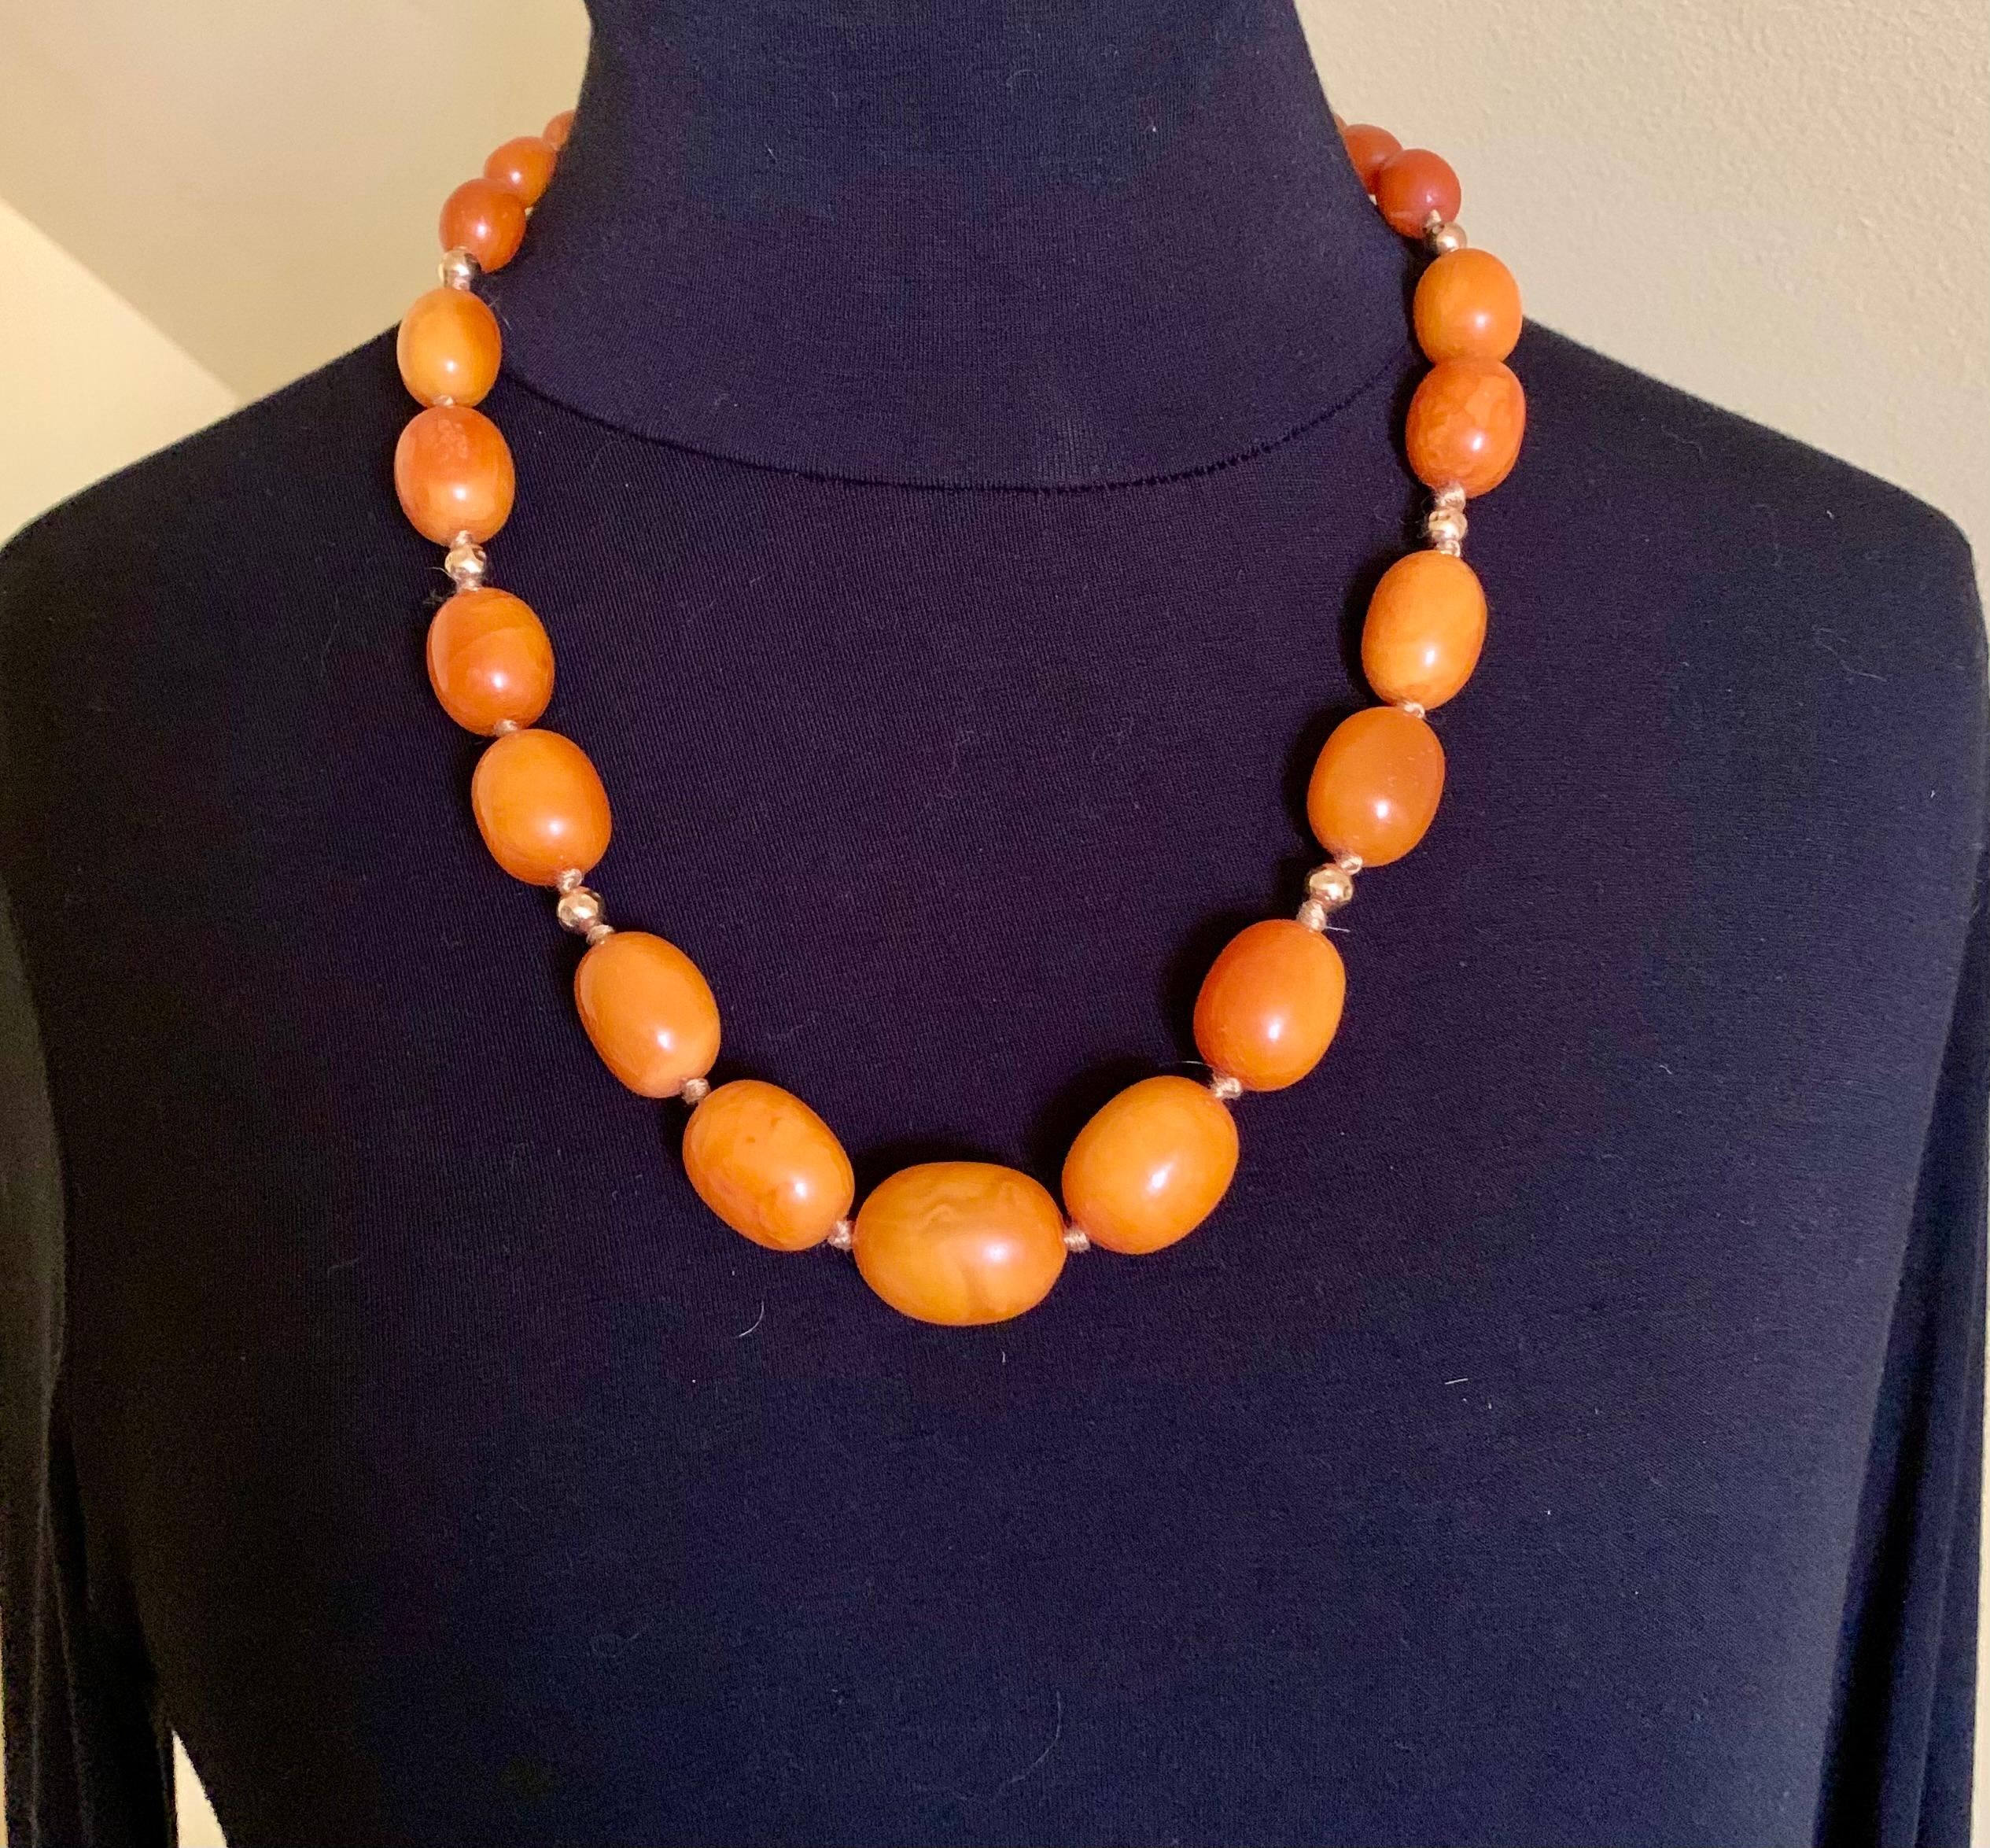 Substantial 72.6 gram natural yellow amber and 14K yellow gold bead necklace composed of twenty seven attracive oval amber beads with 14K yellow gold spacer beads. Excellent color with desirable variegation refered to as egg yolk. 
Amber beads: 29mm